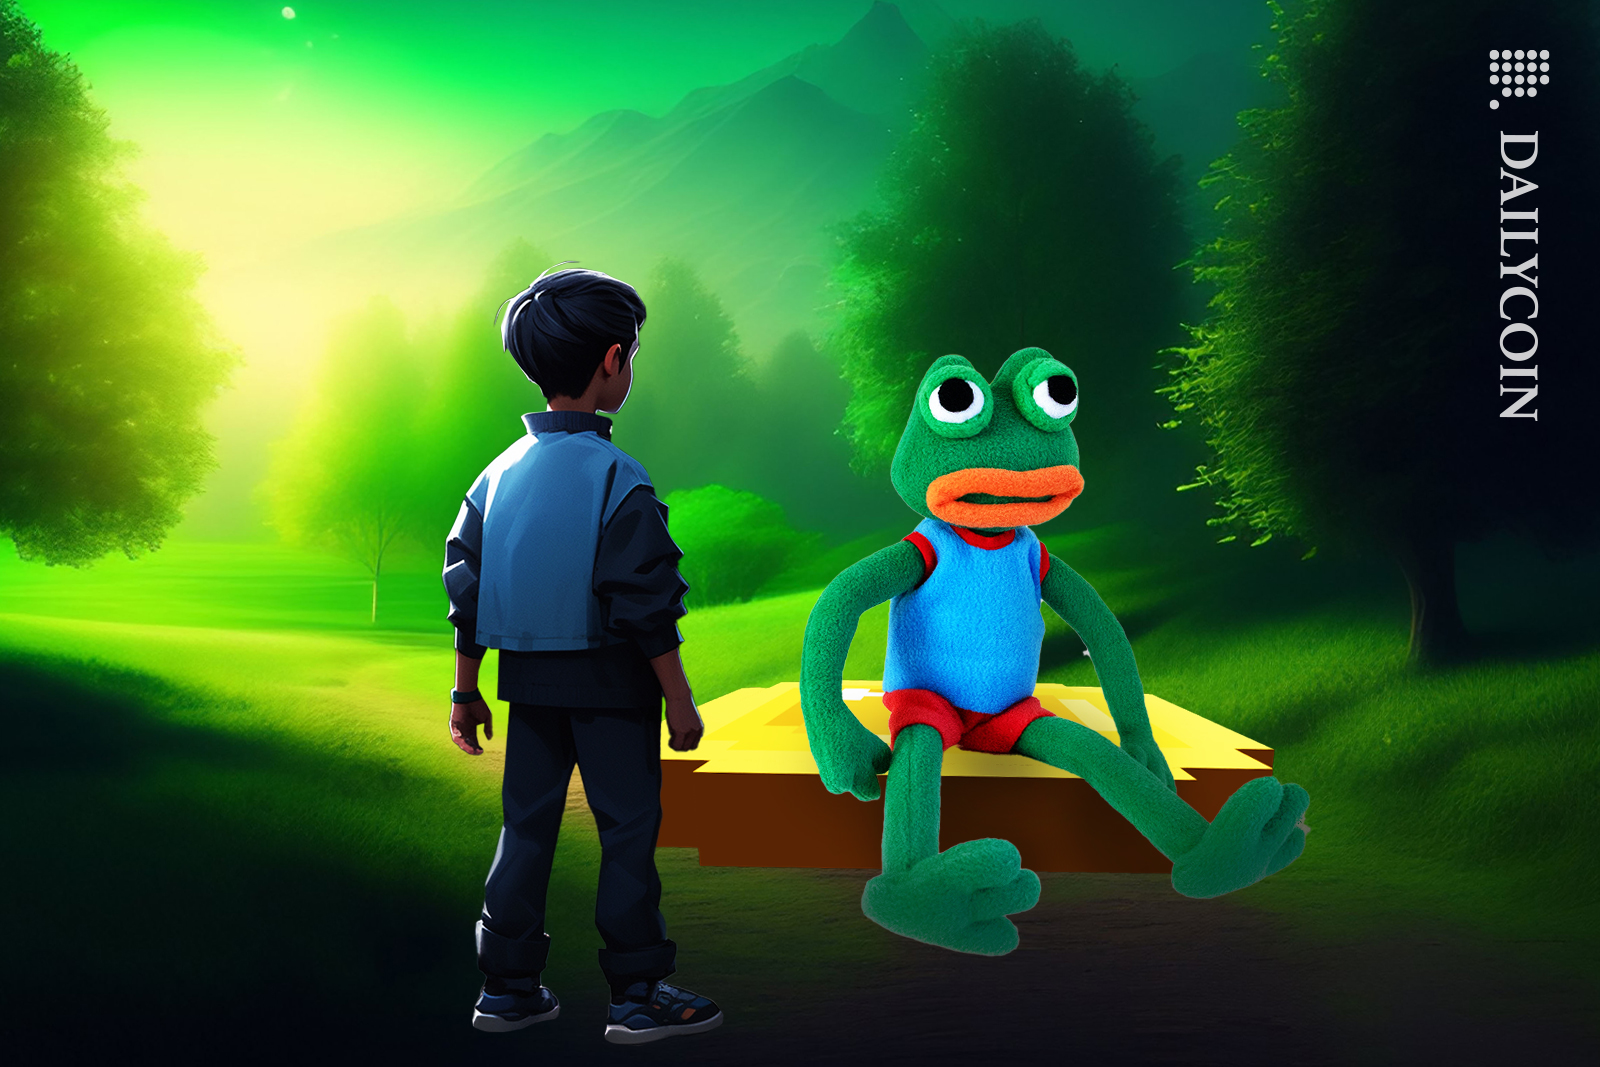 A Kid approaching PEPE on his coin looking unconfident